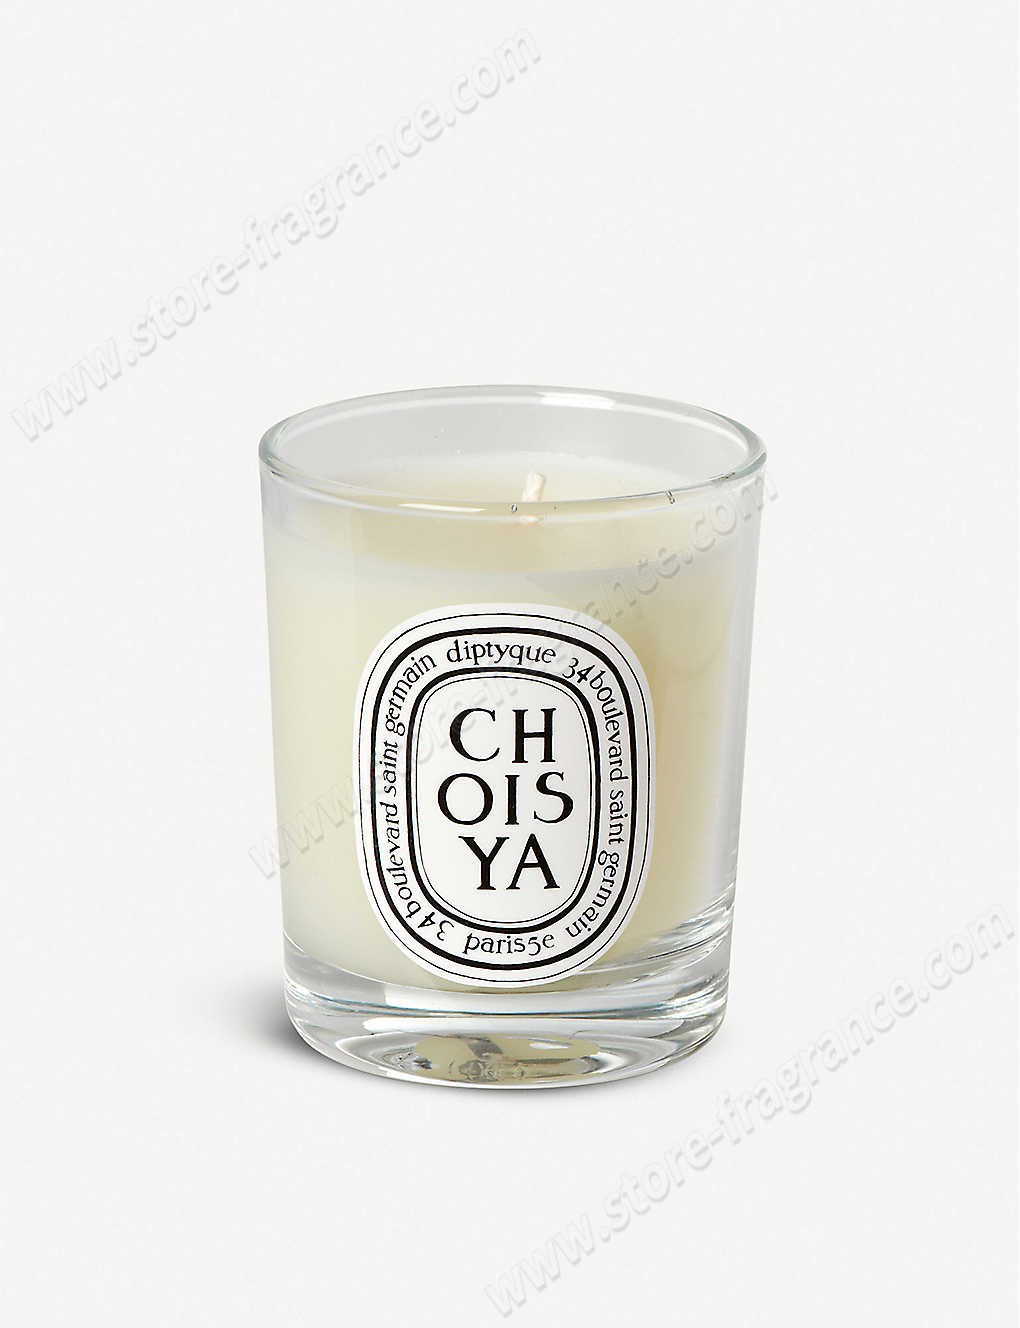 DIPTYQUE/Choisya scented candle ✿ Discount Store - DIPTYQUE/Choisya scented candle ✿ Discount Store